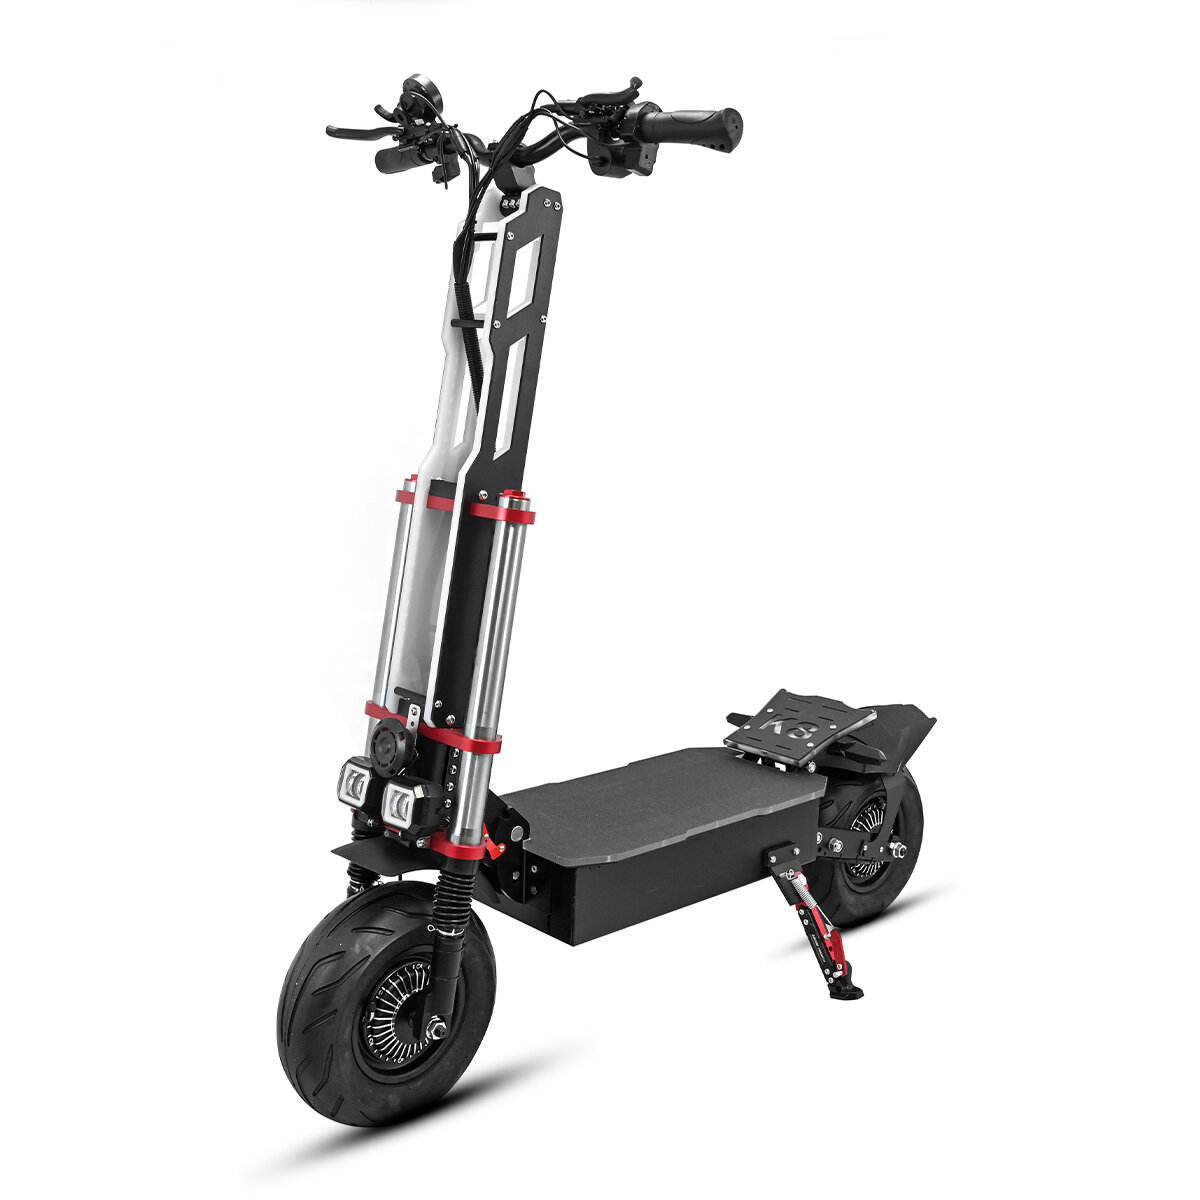 best price,ootd,k8,electric,scooter,60v,40ah,3000wx2,12inch,eu,discount